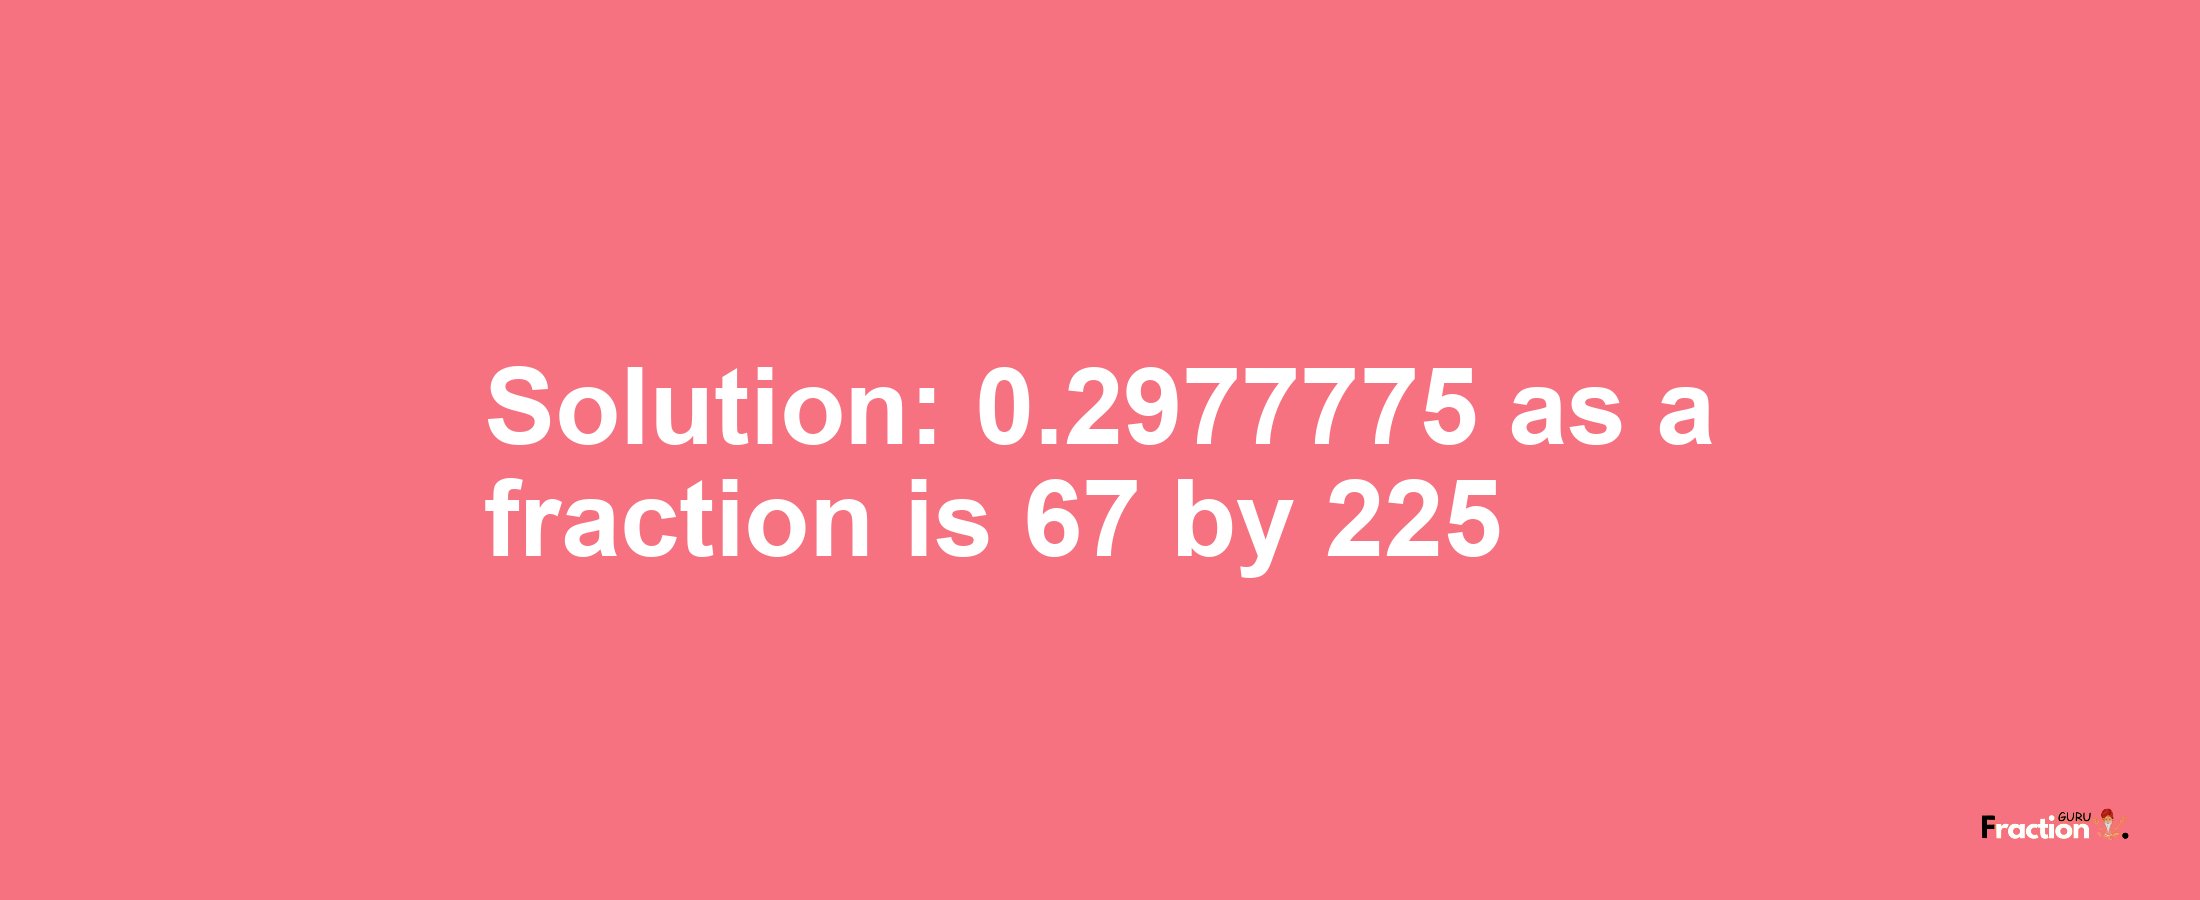 Solution:0.2977775 as a fraction is 67/225